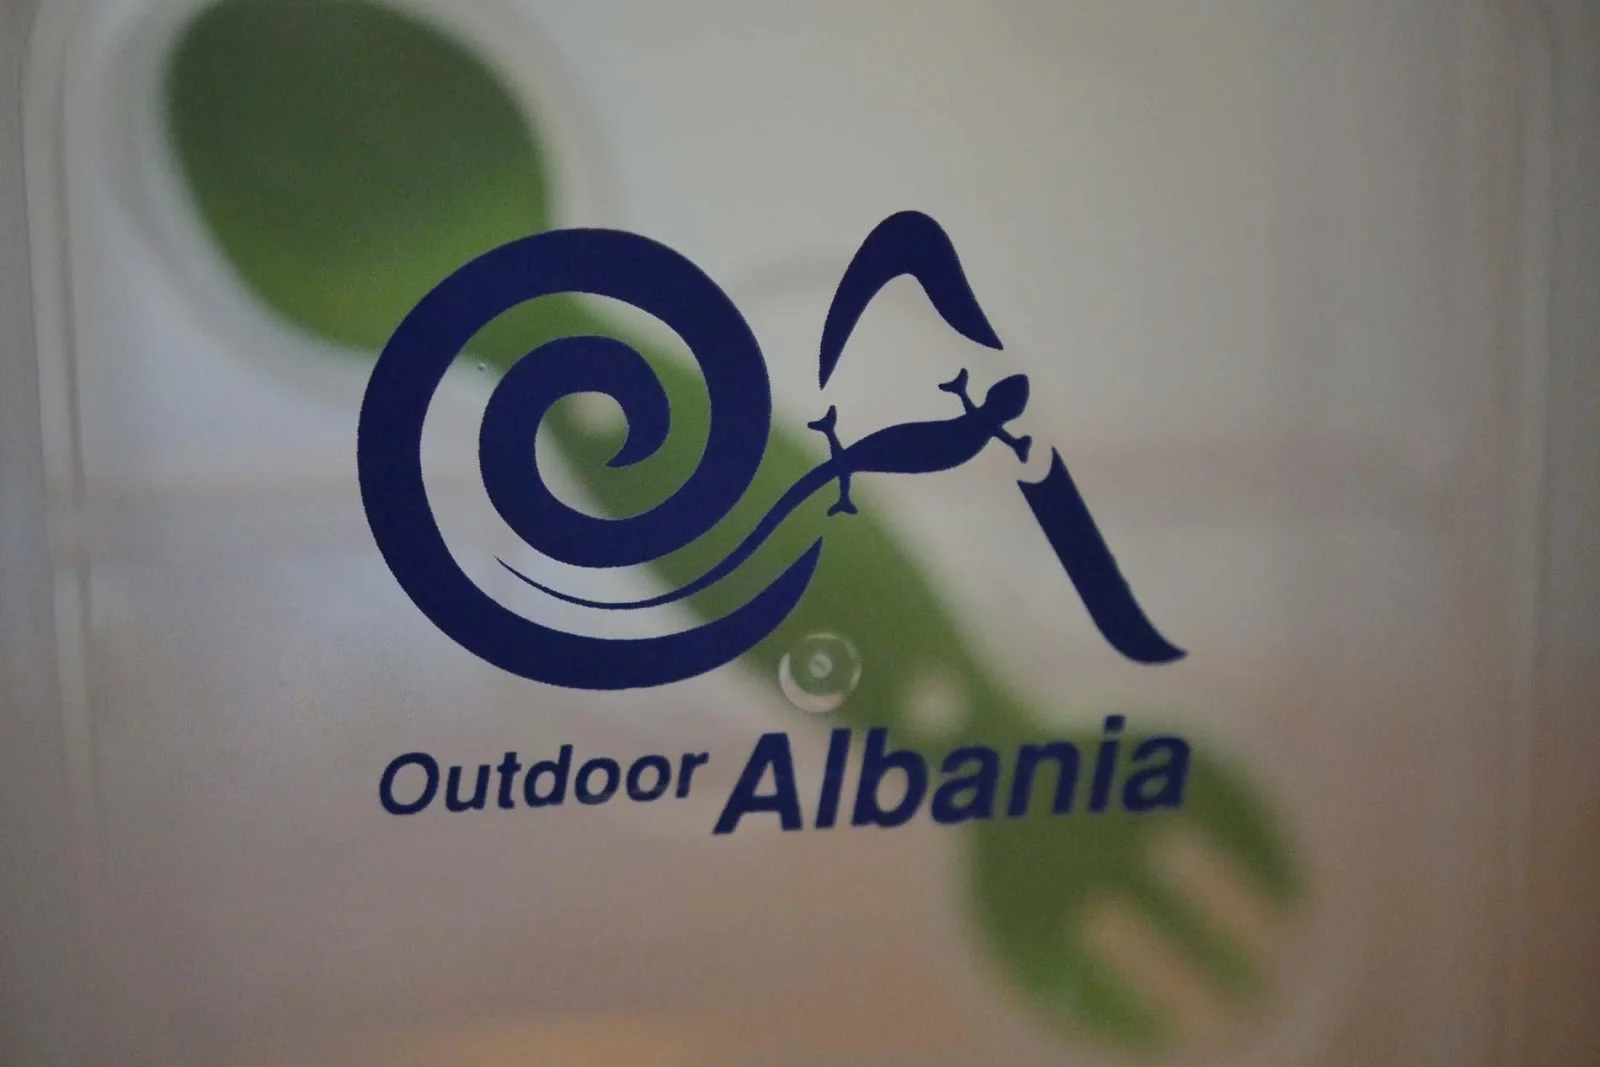 At Outdoor Albania we create a better, healthier and sustainable future